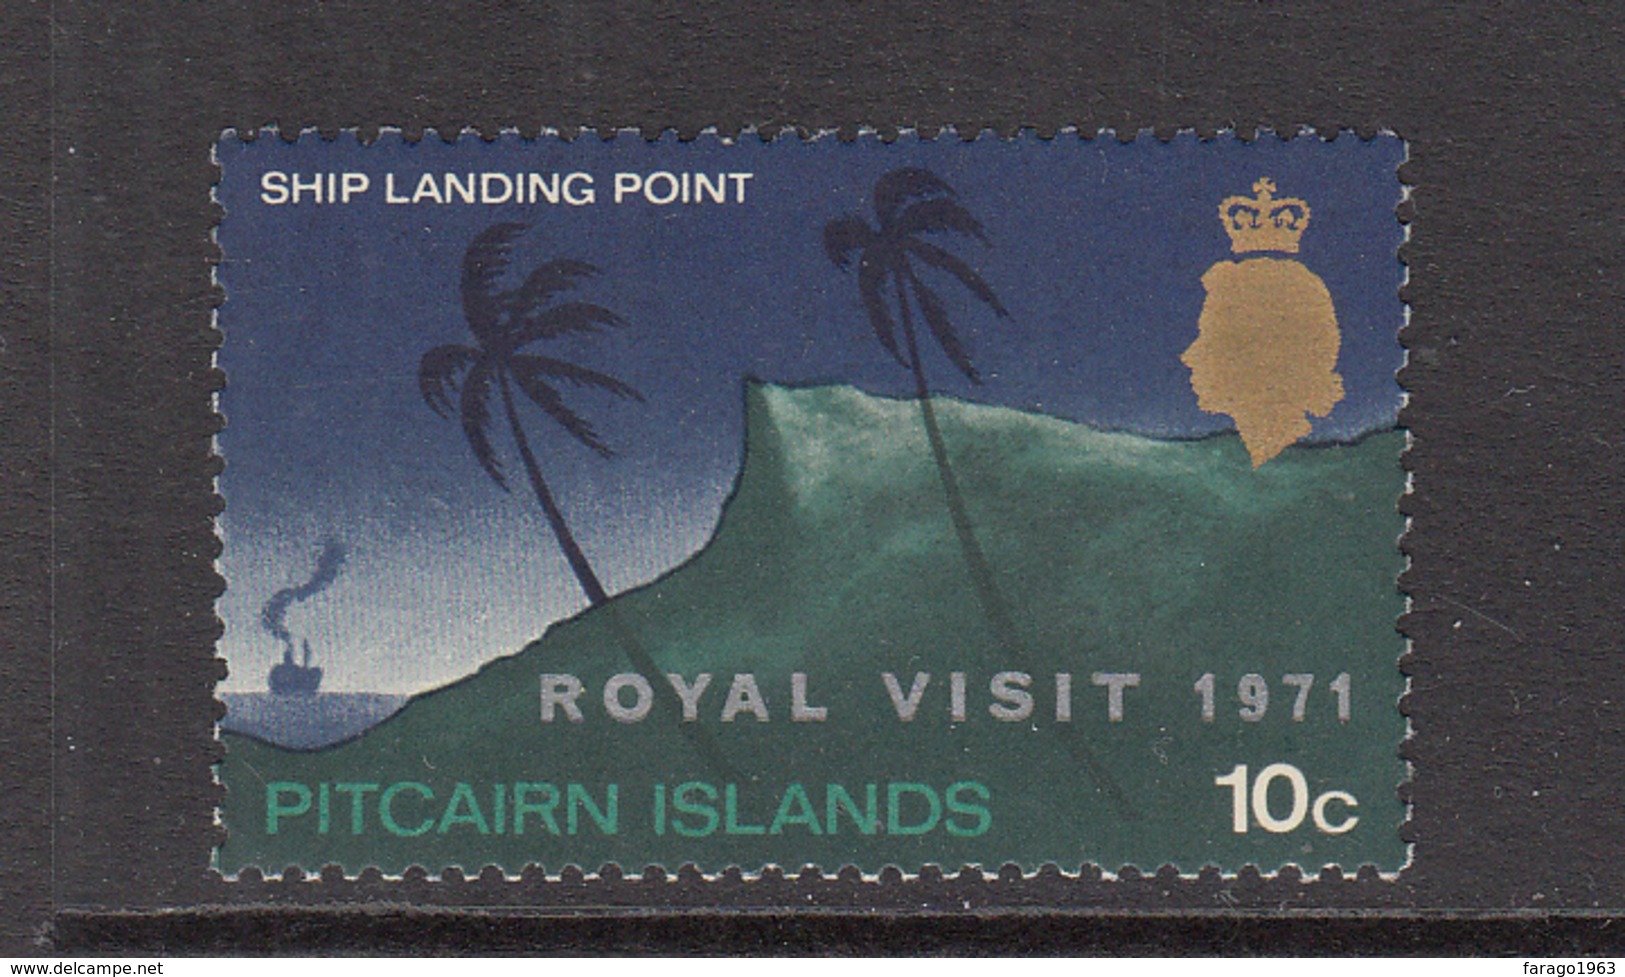 1971 Pitcairn Royal Visit Complete Set Of 1 MNH Never Hinged (Guaranteed) - Pitcairn